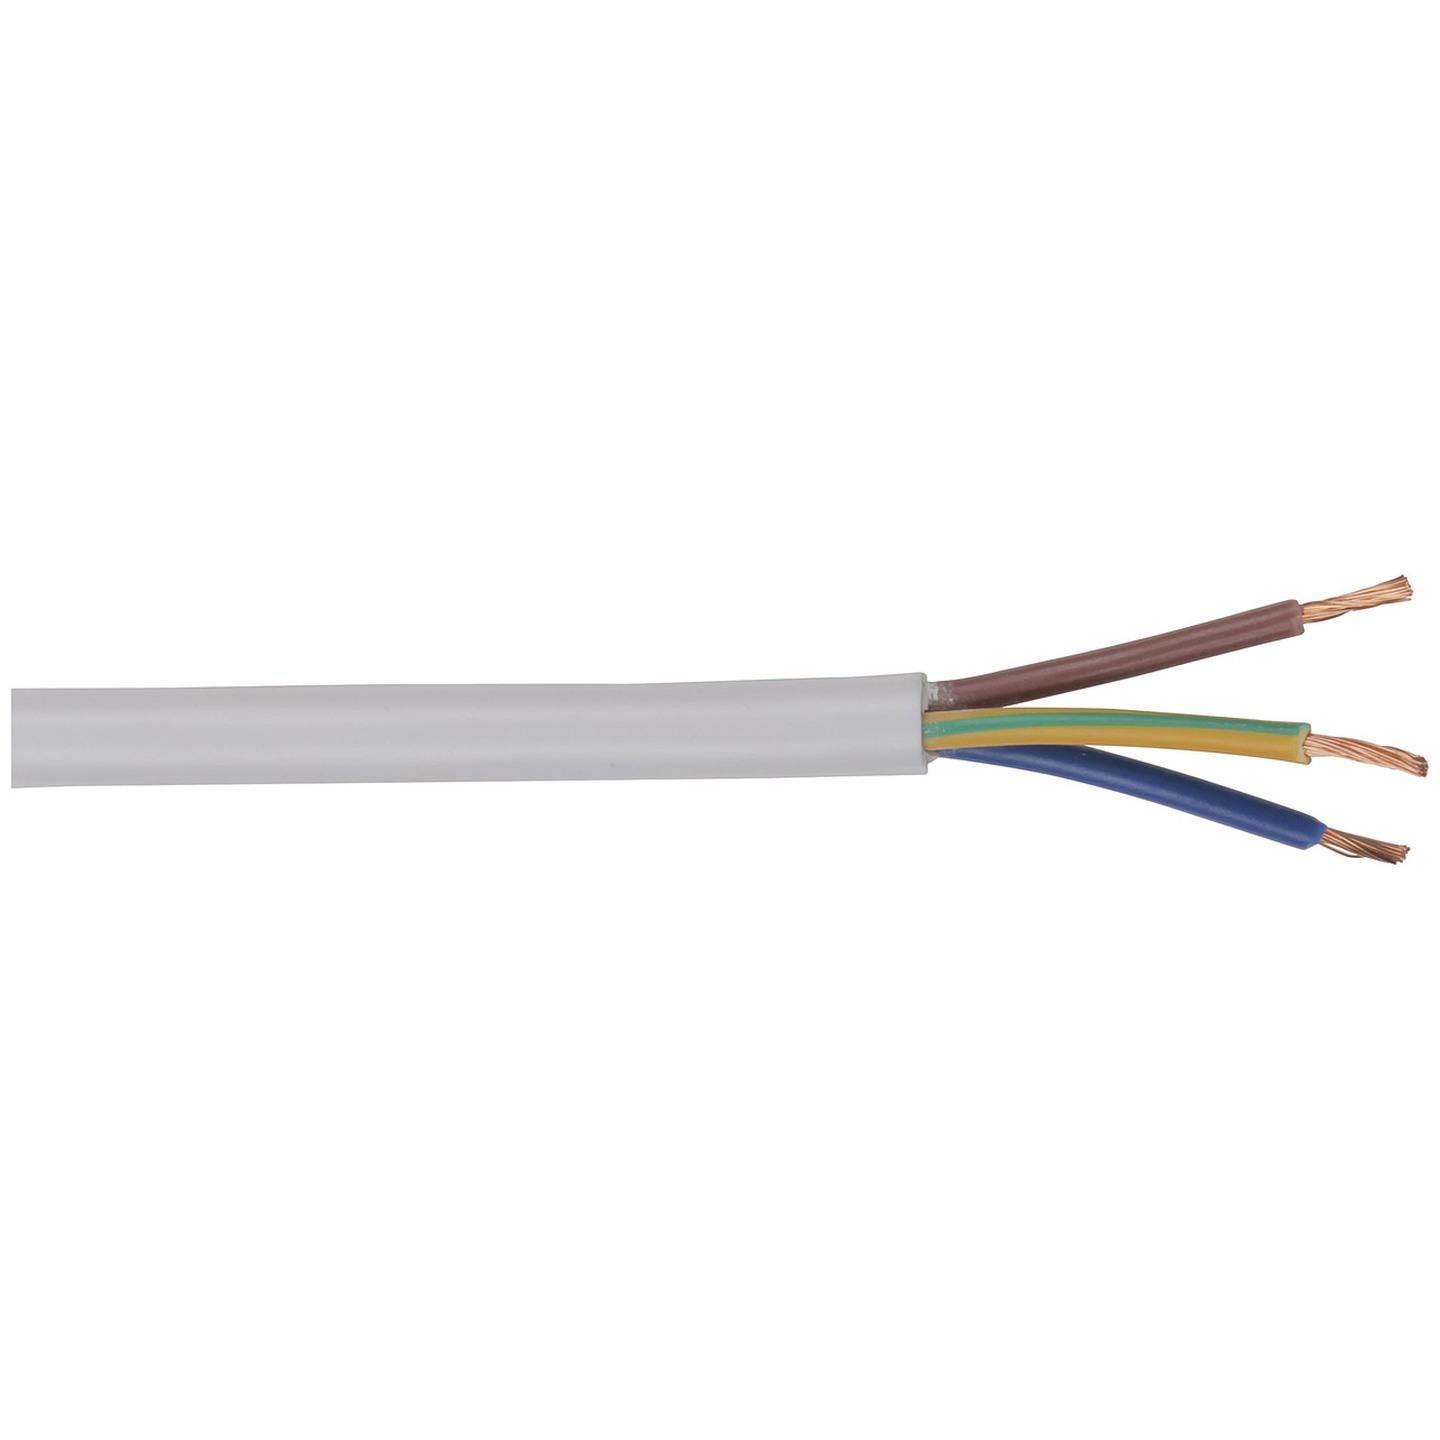 Flexible Three Core Mains Cable